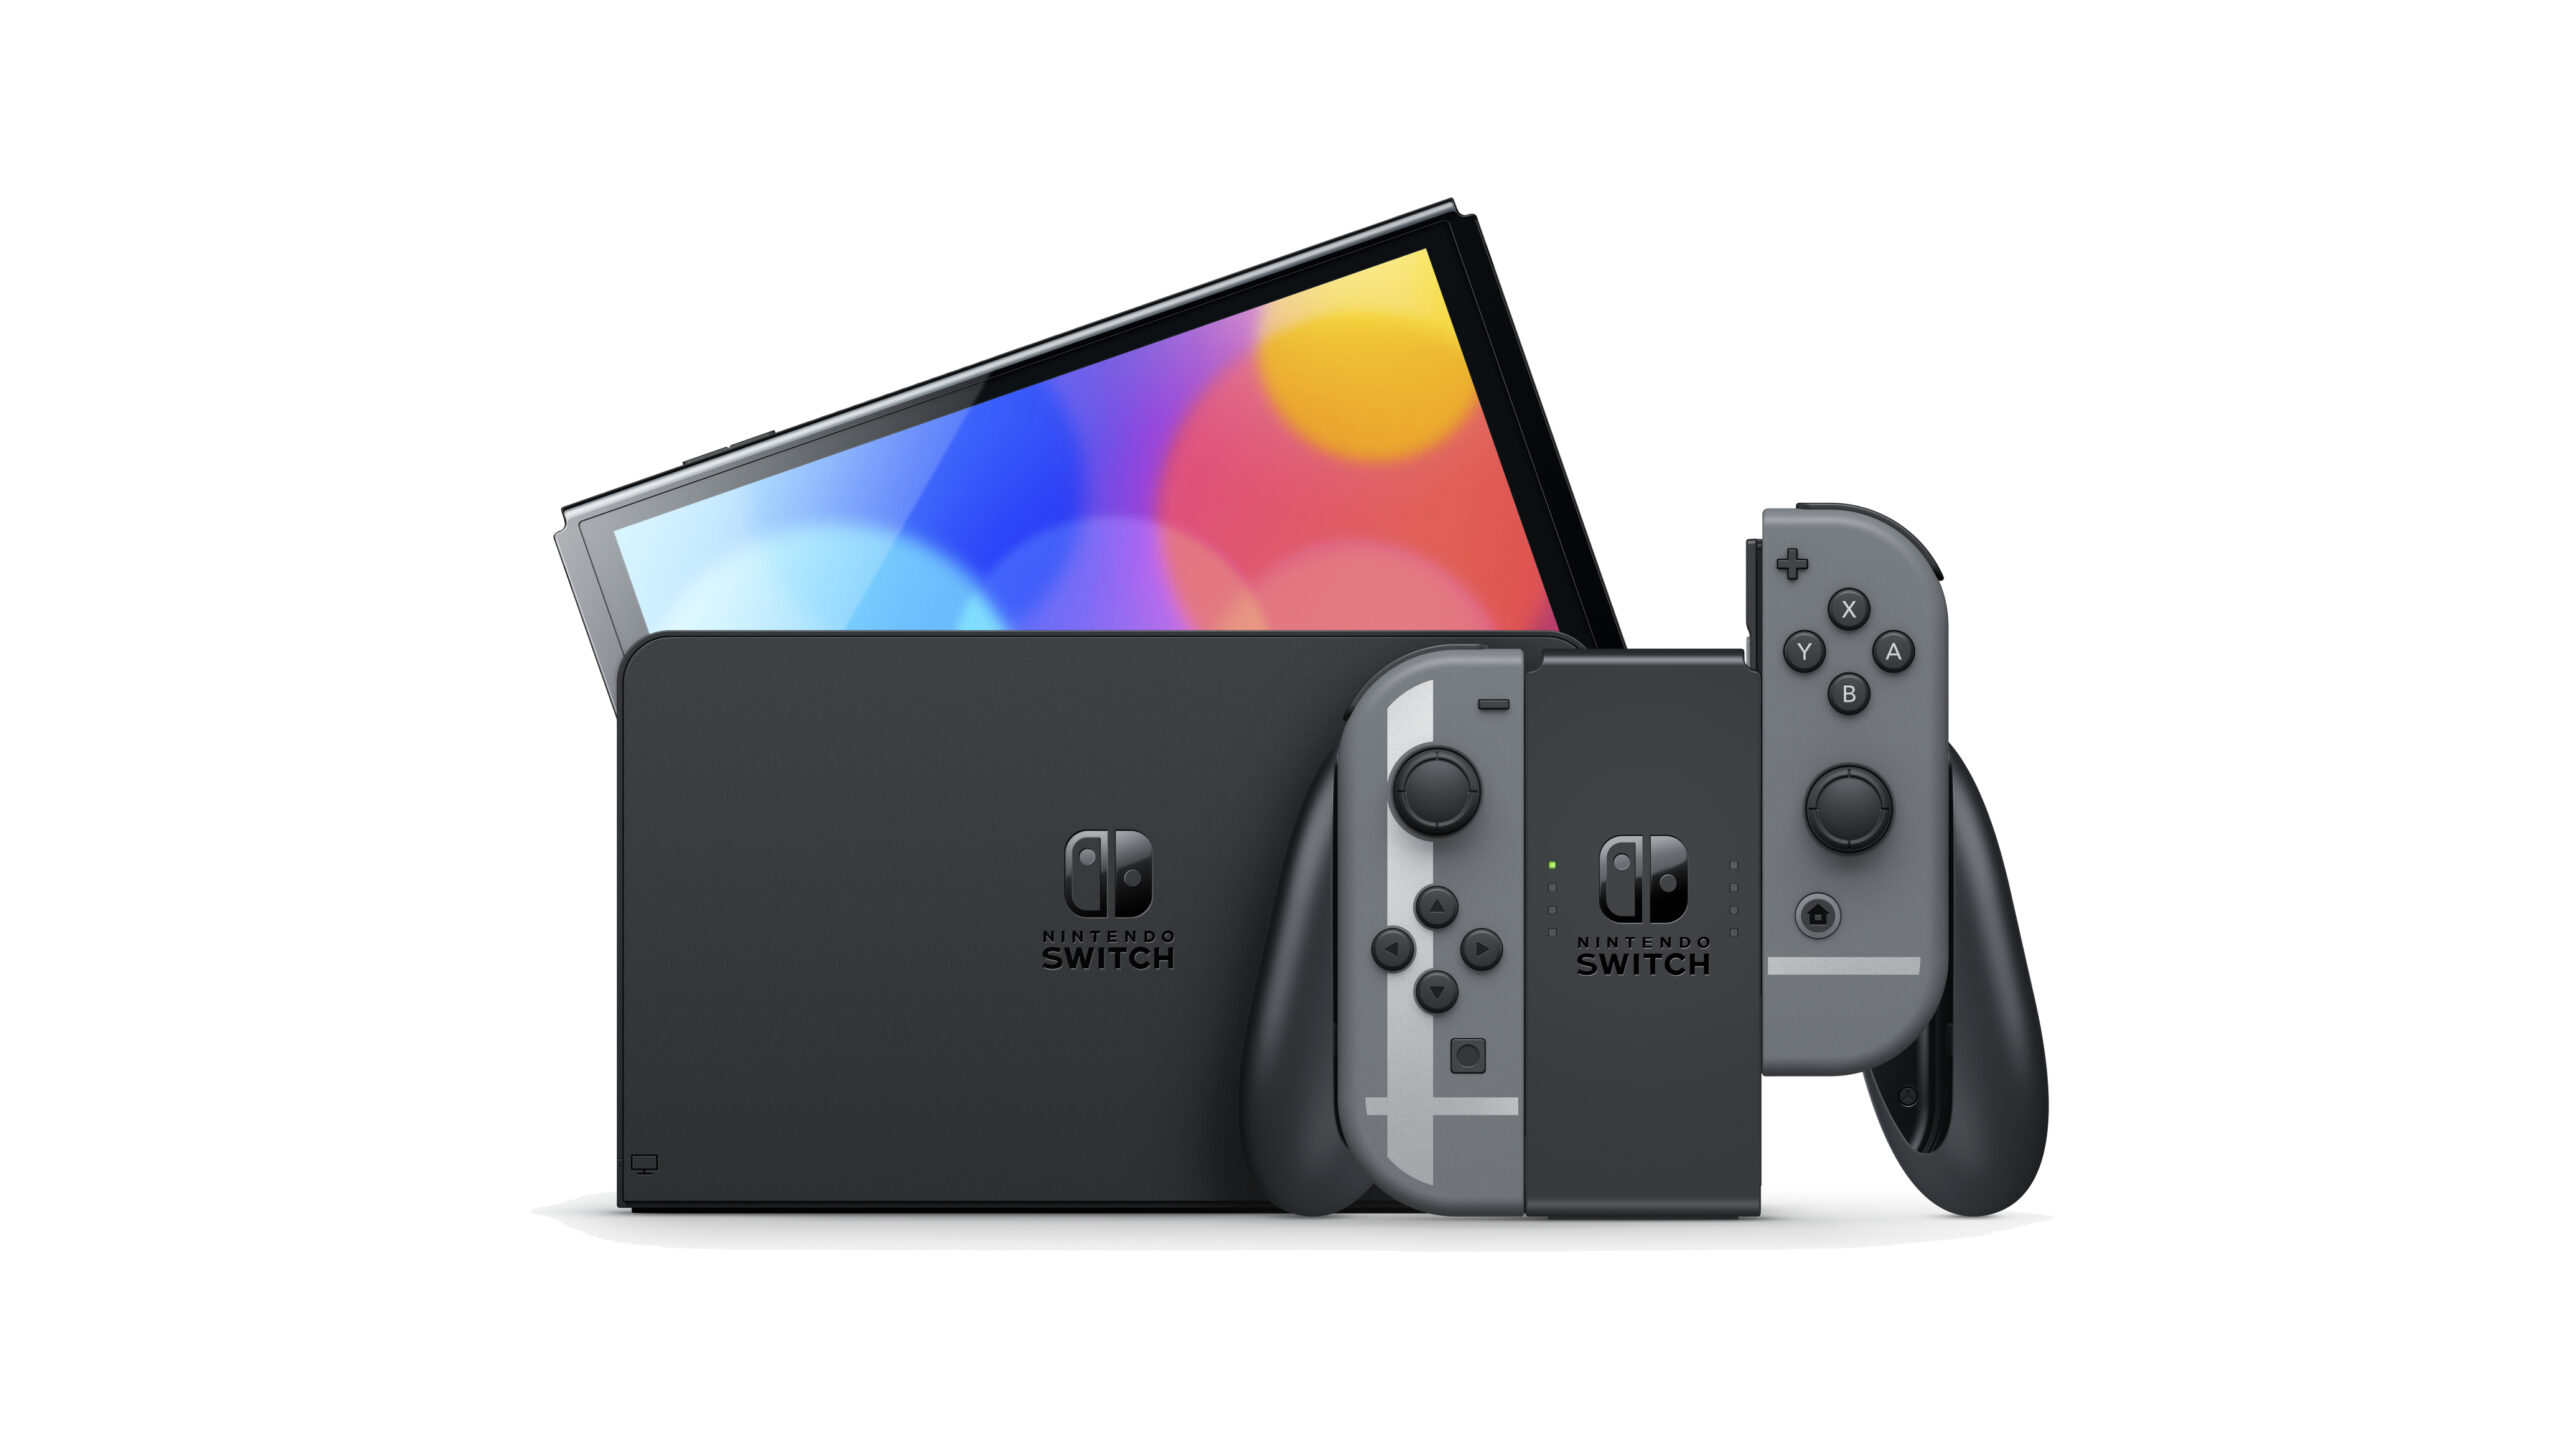 New Report Claims Nintendo Switch 2 to Feature Magnetic Joy-Con